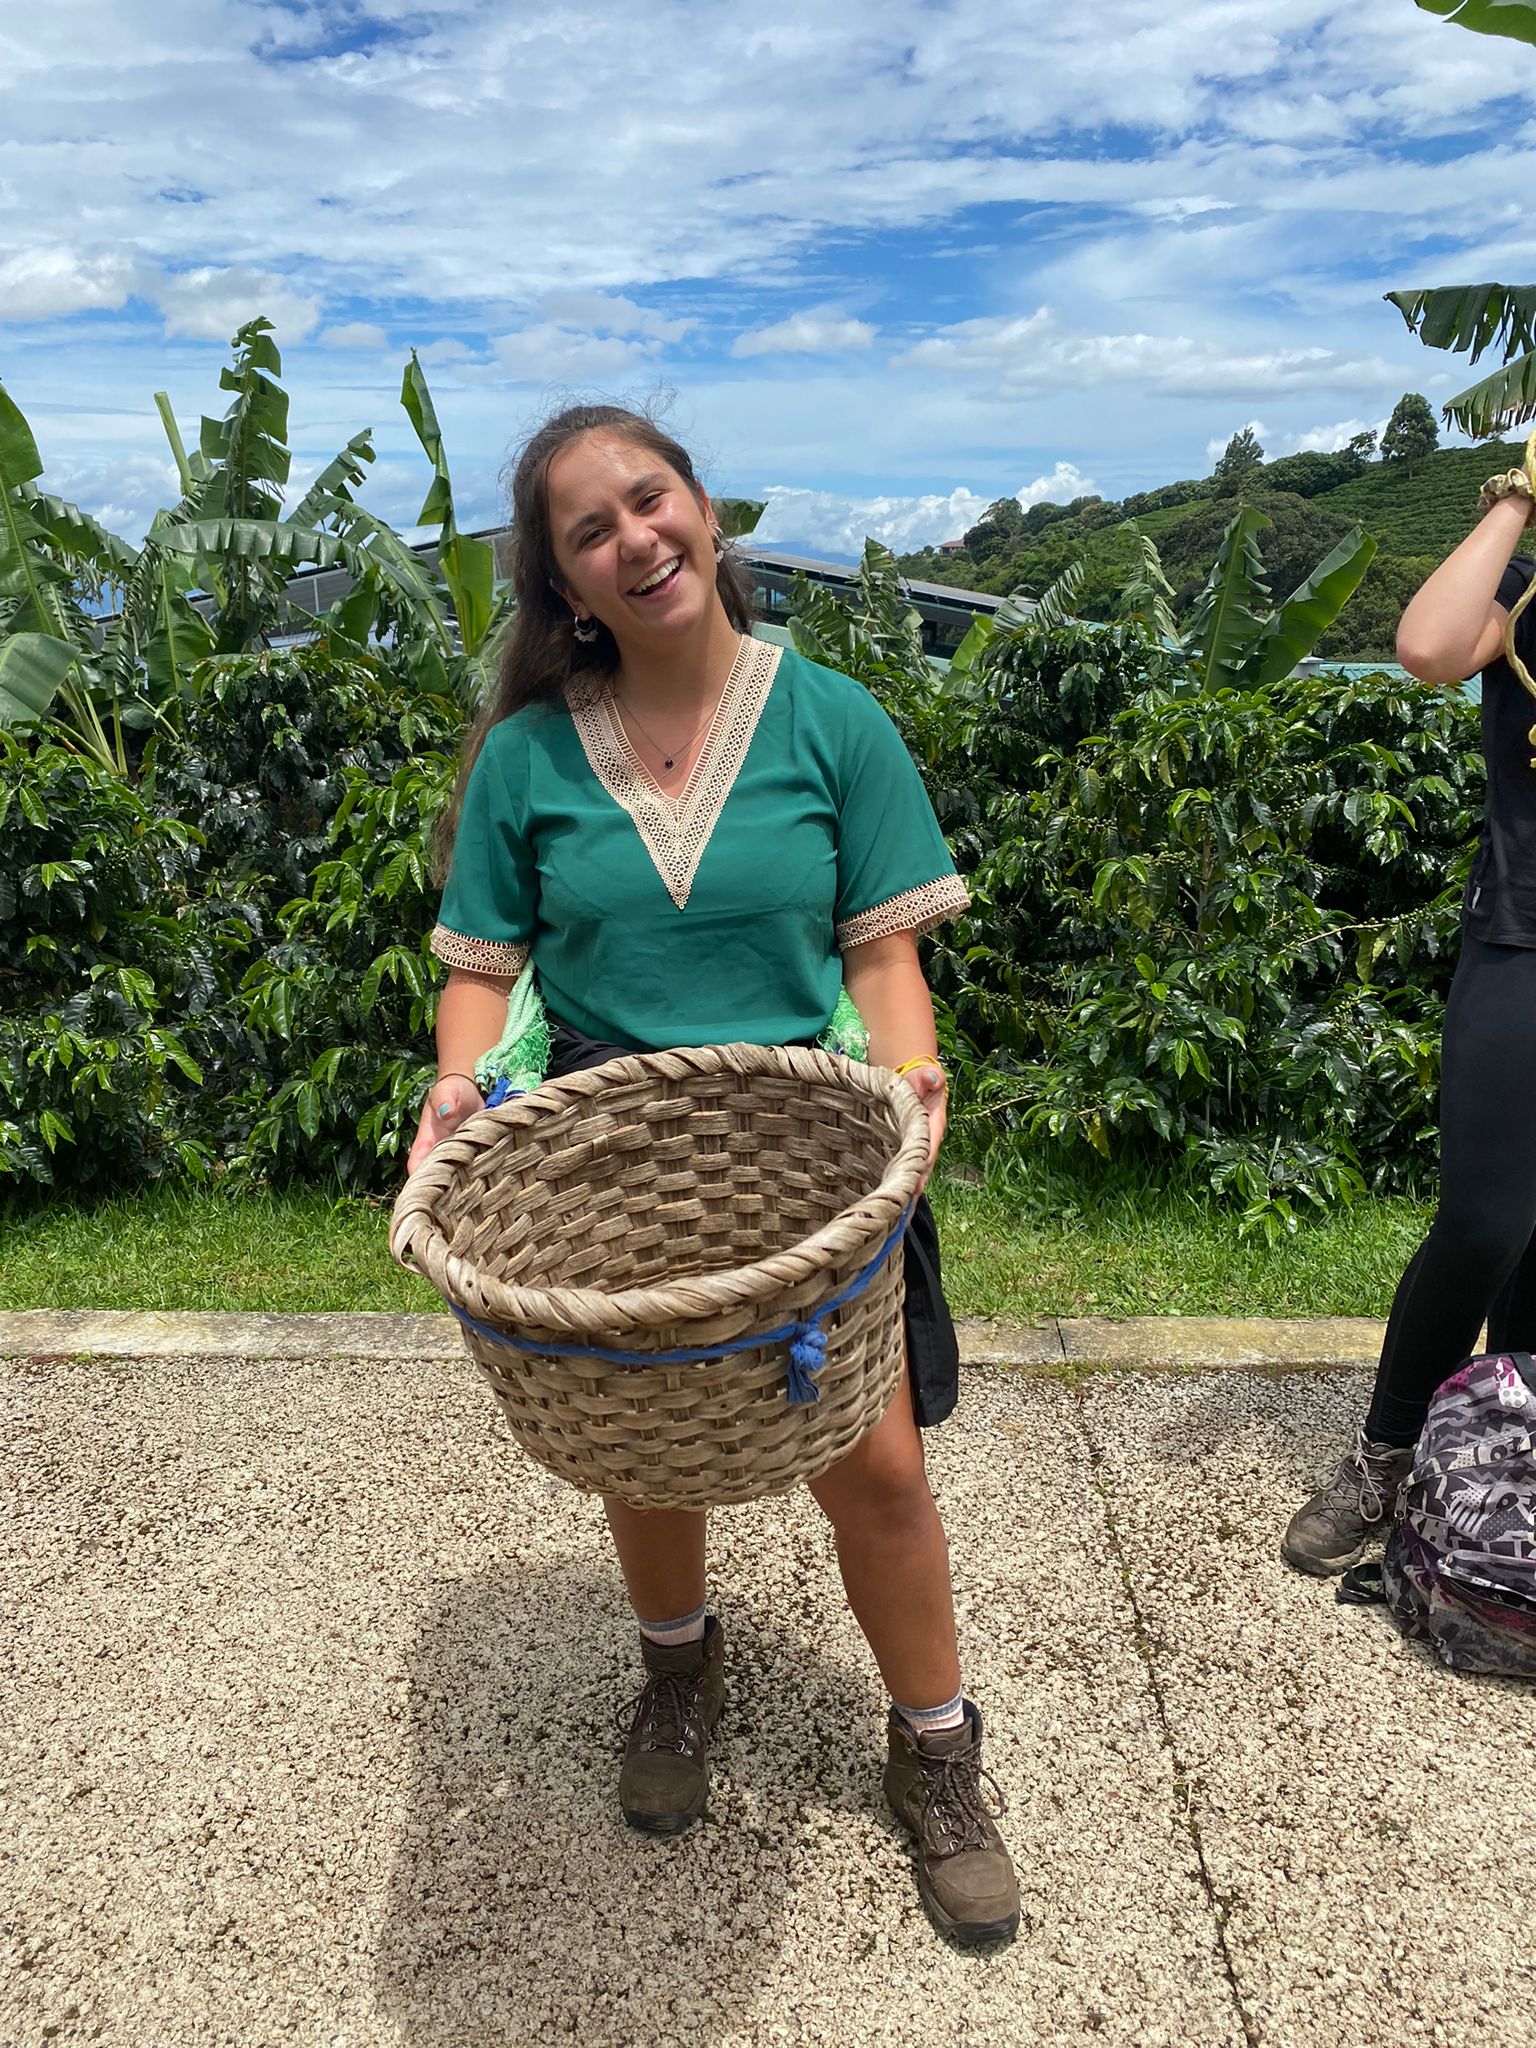 Sloths, coffee & unforgettable memories: Life as a volunteer in Costa Rica with Cemaliye B.